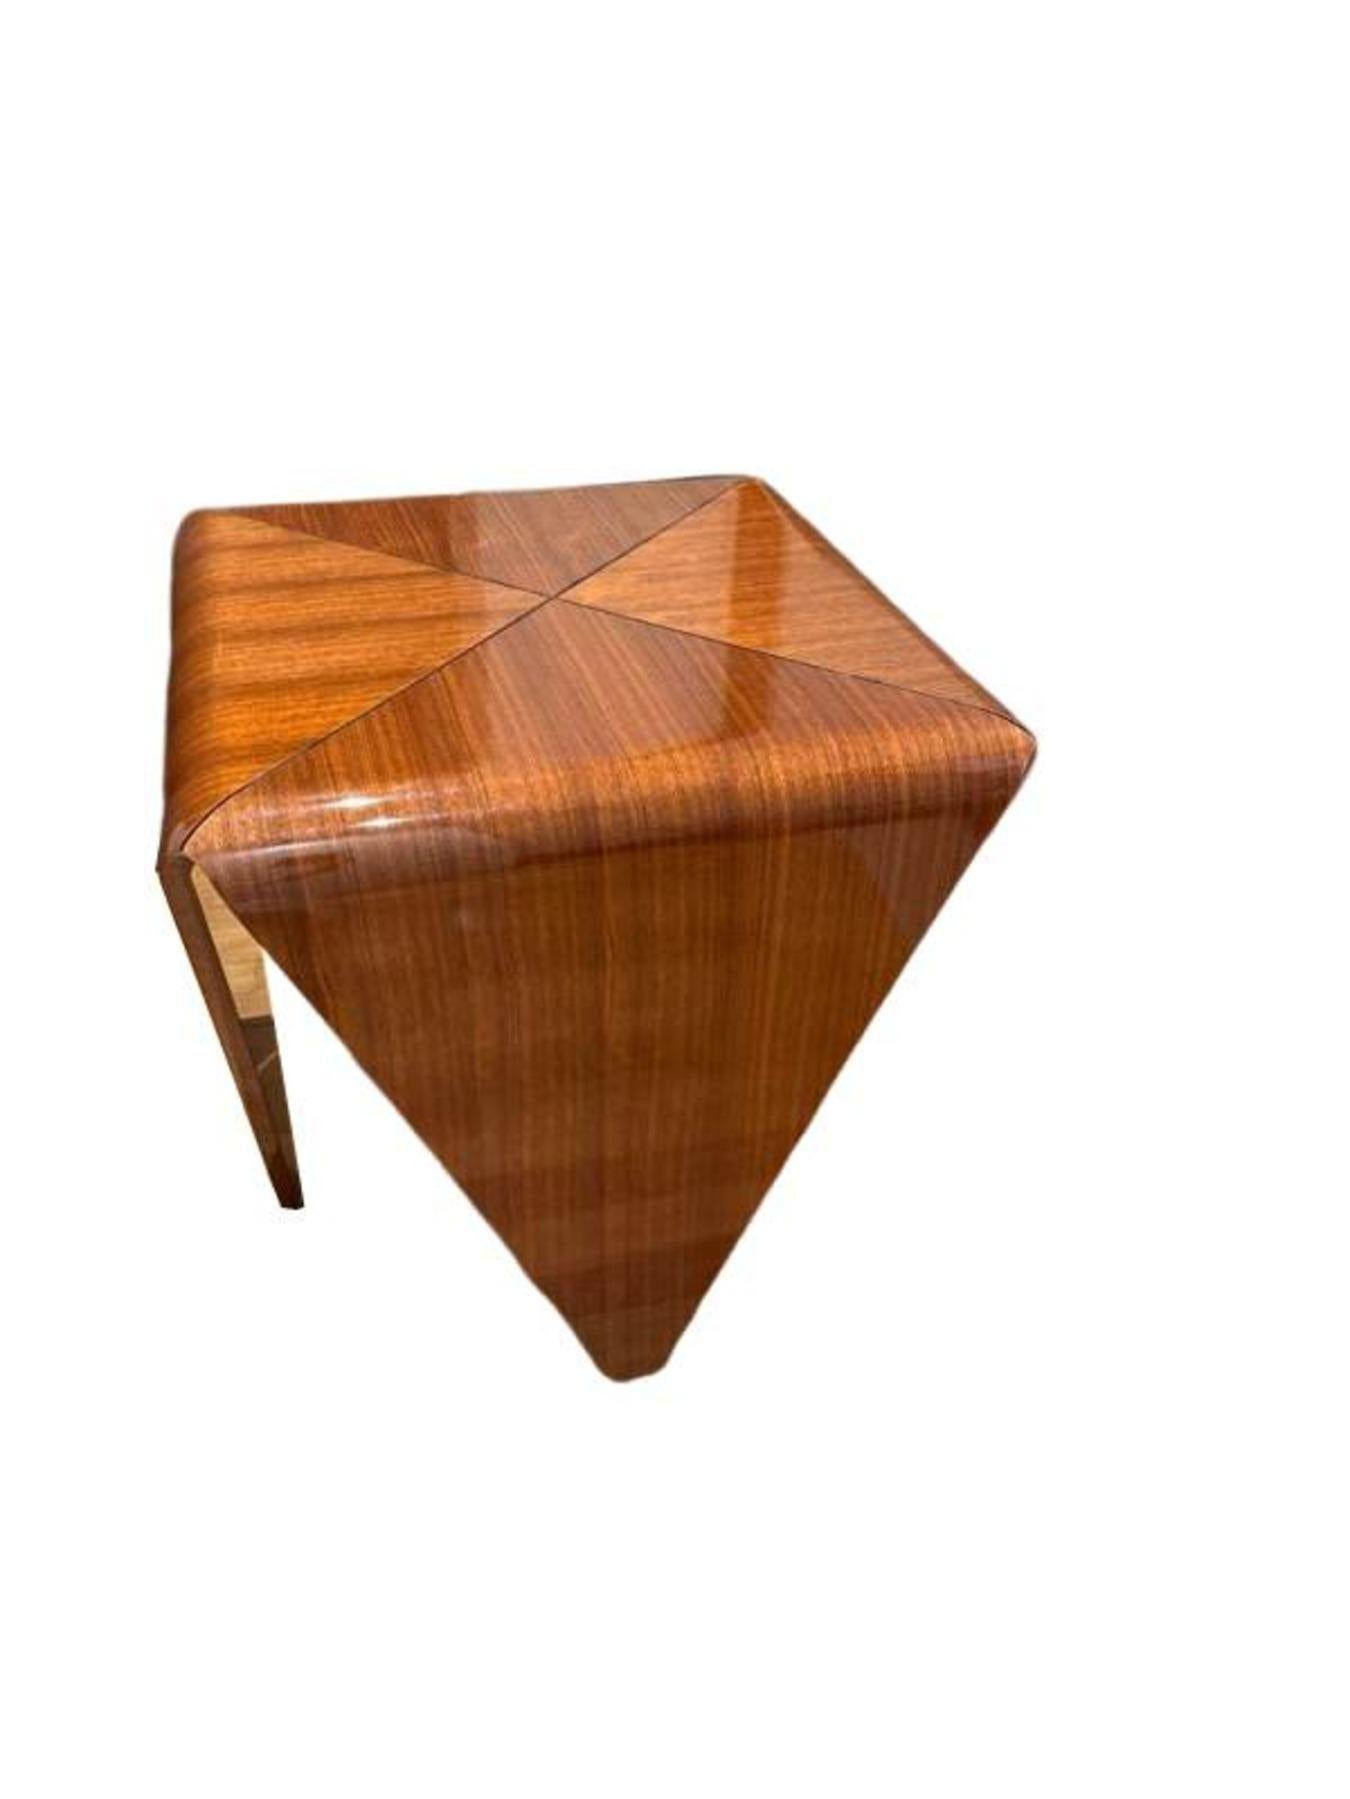 American Pair of Contemporary Wood Side Tables For Sale